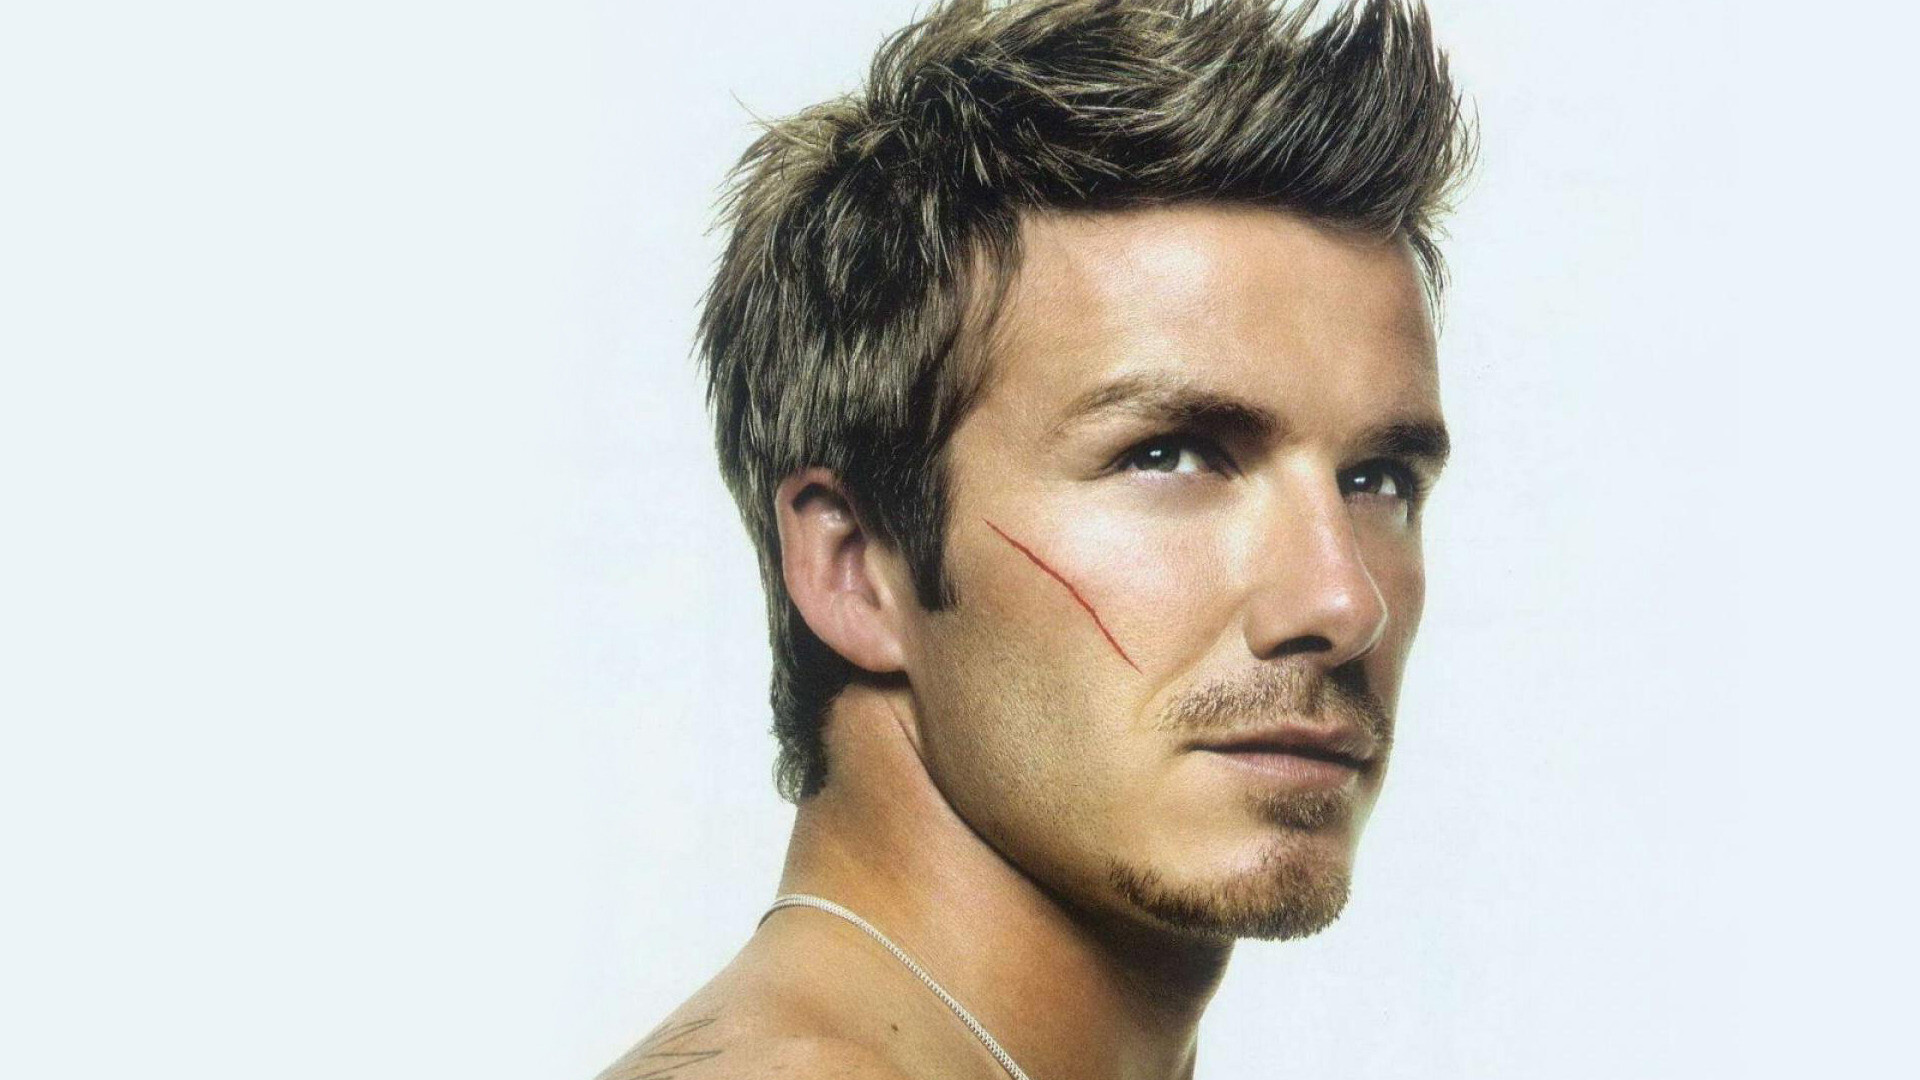 David Beckham: Was voted the BBC Sports Personality of the Year for 2001. 1920x1080 Full HD Background.